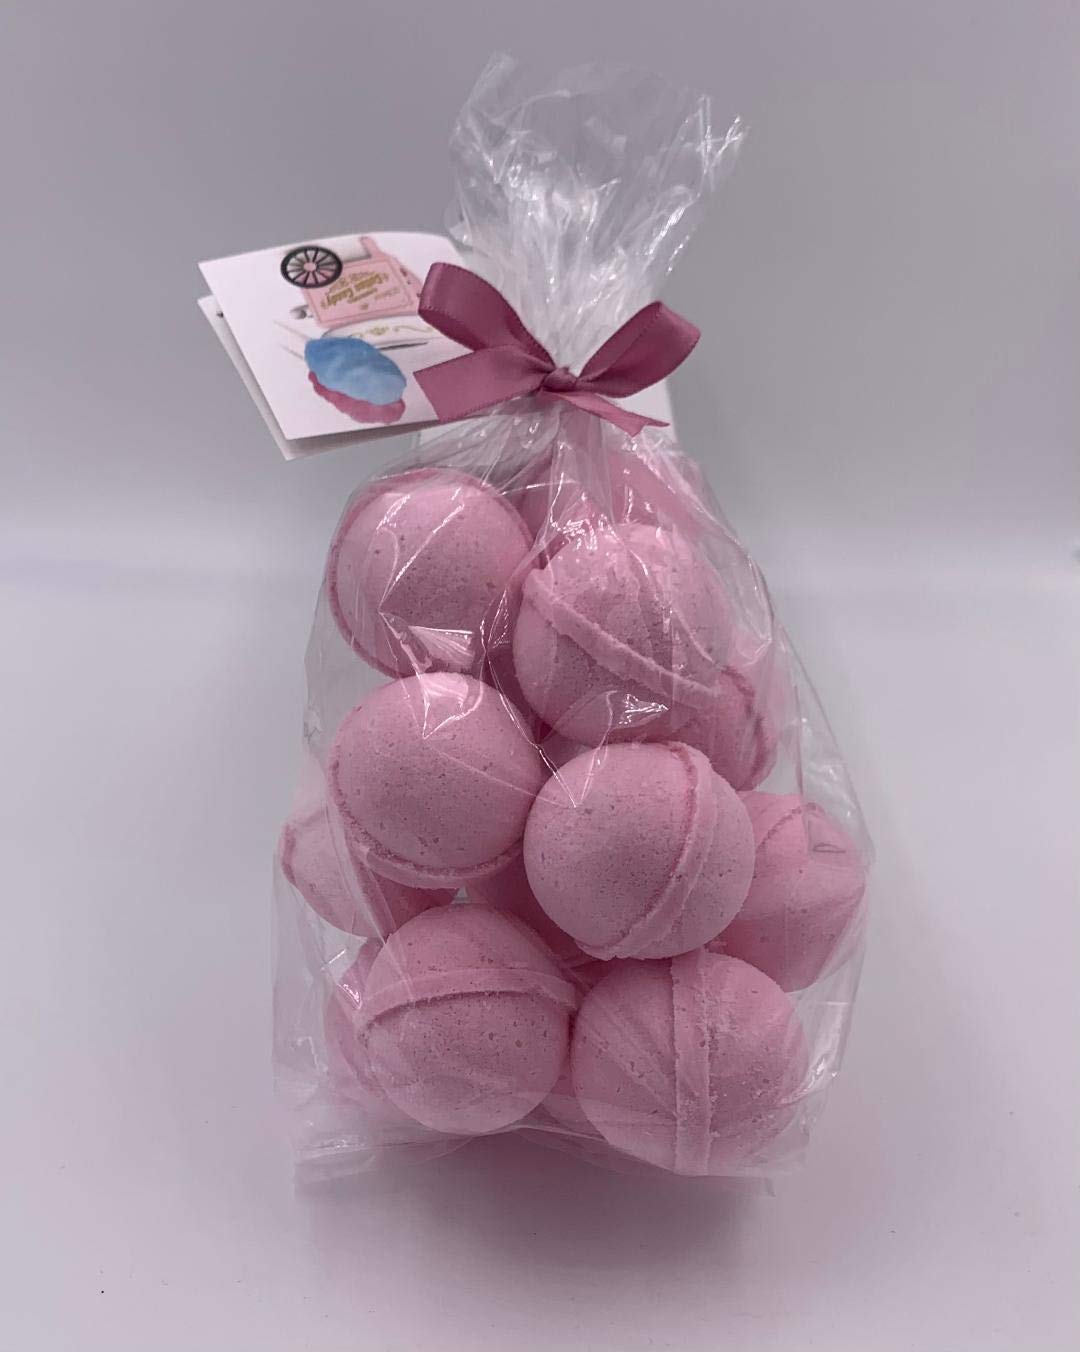 Spa Pure COTTONCANDY Bath Bombs: Gift Set with 14 1 oz, ultra-moisturizing bath bombs, great for dry skin, makes a great gift